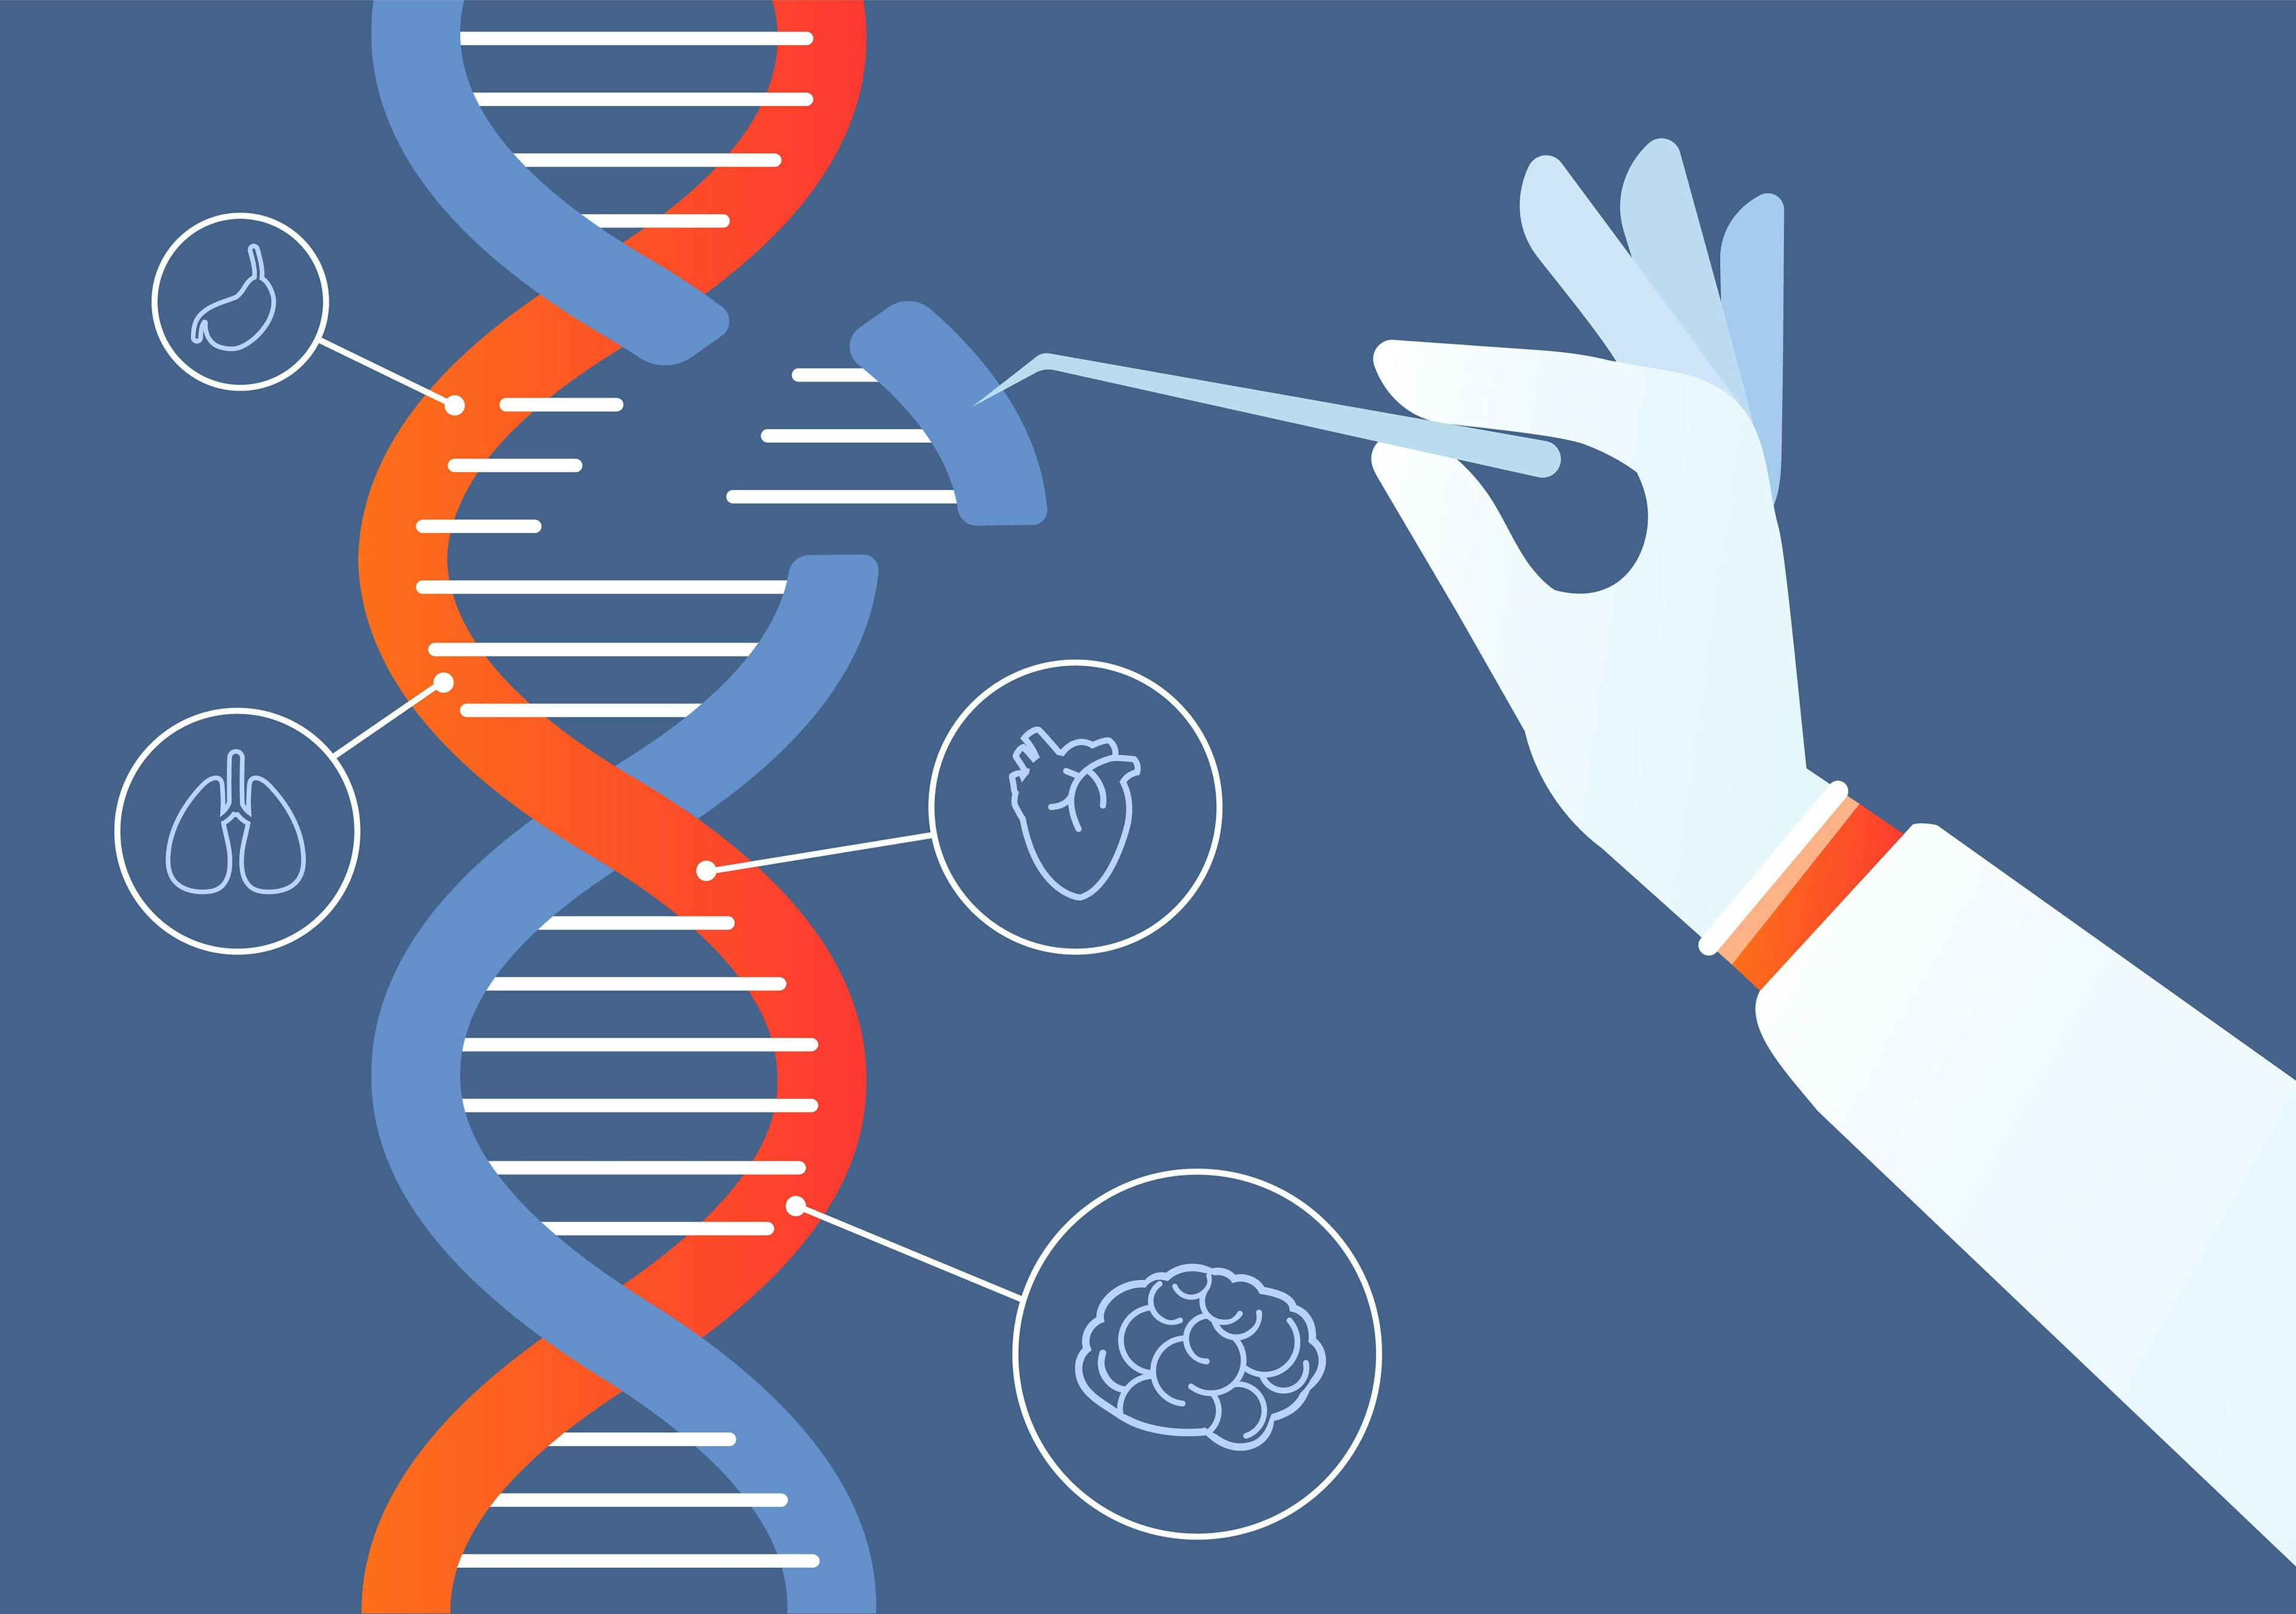 Gene Therapies for ALS, Friedreich’s Ataxia the Focus of New CRISPR, Capsida Partnership 